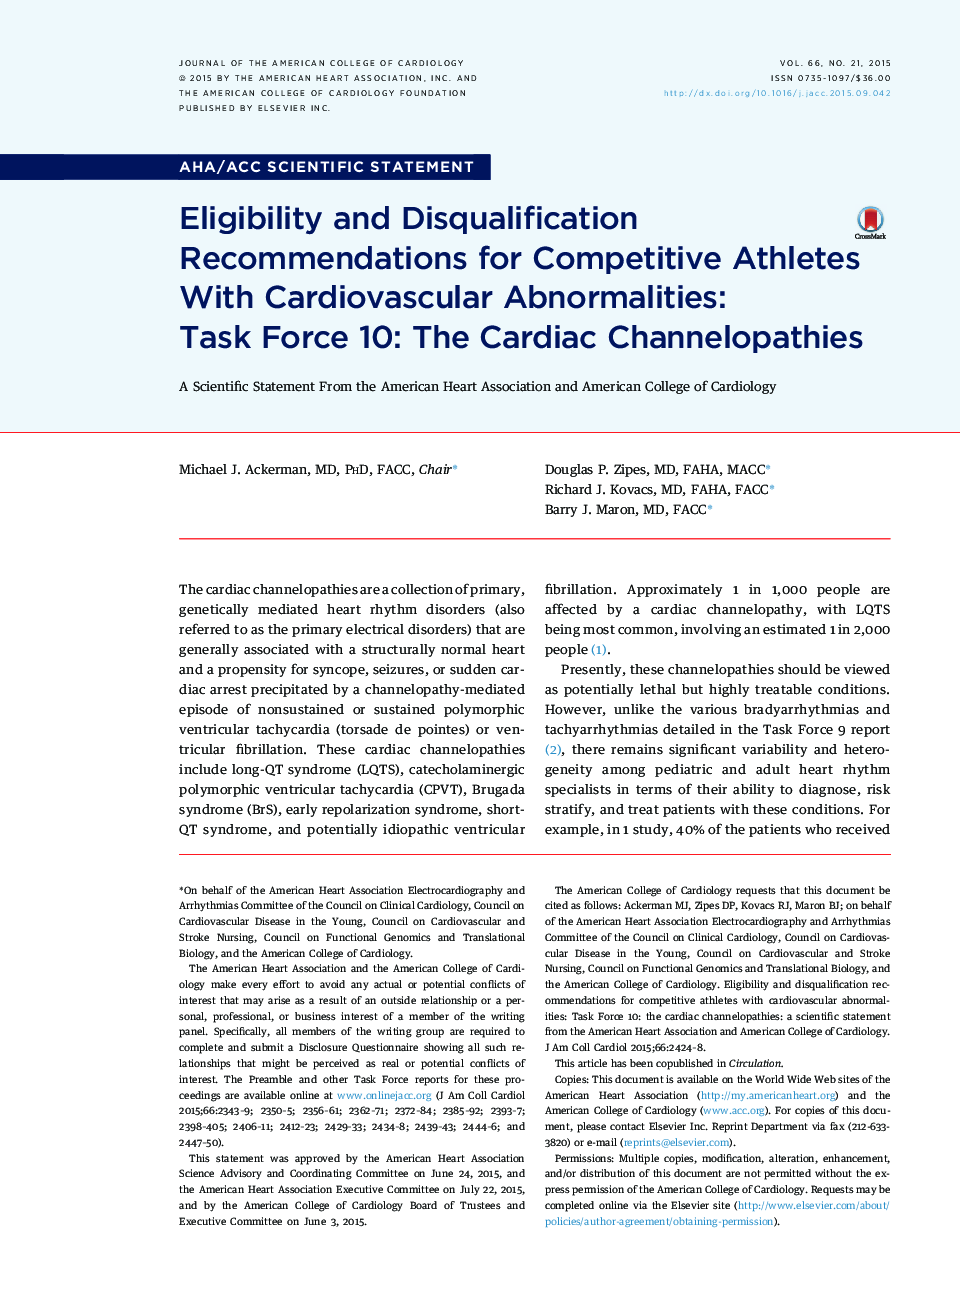 Eligibility and Disqualification Recommendations for Competitive Athletes With Cardiovascular Abnormalities: Task Force 10: TheÂ Cardiac Channelopathies